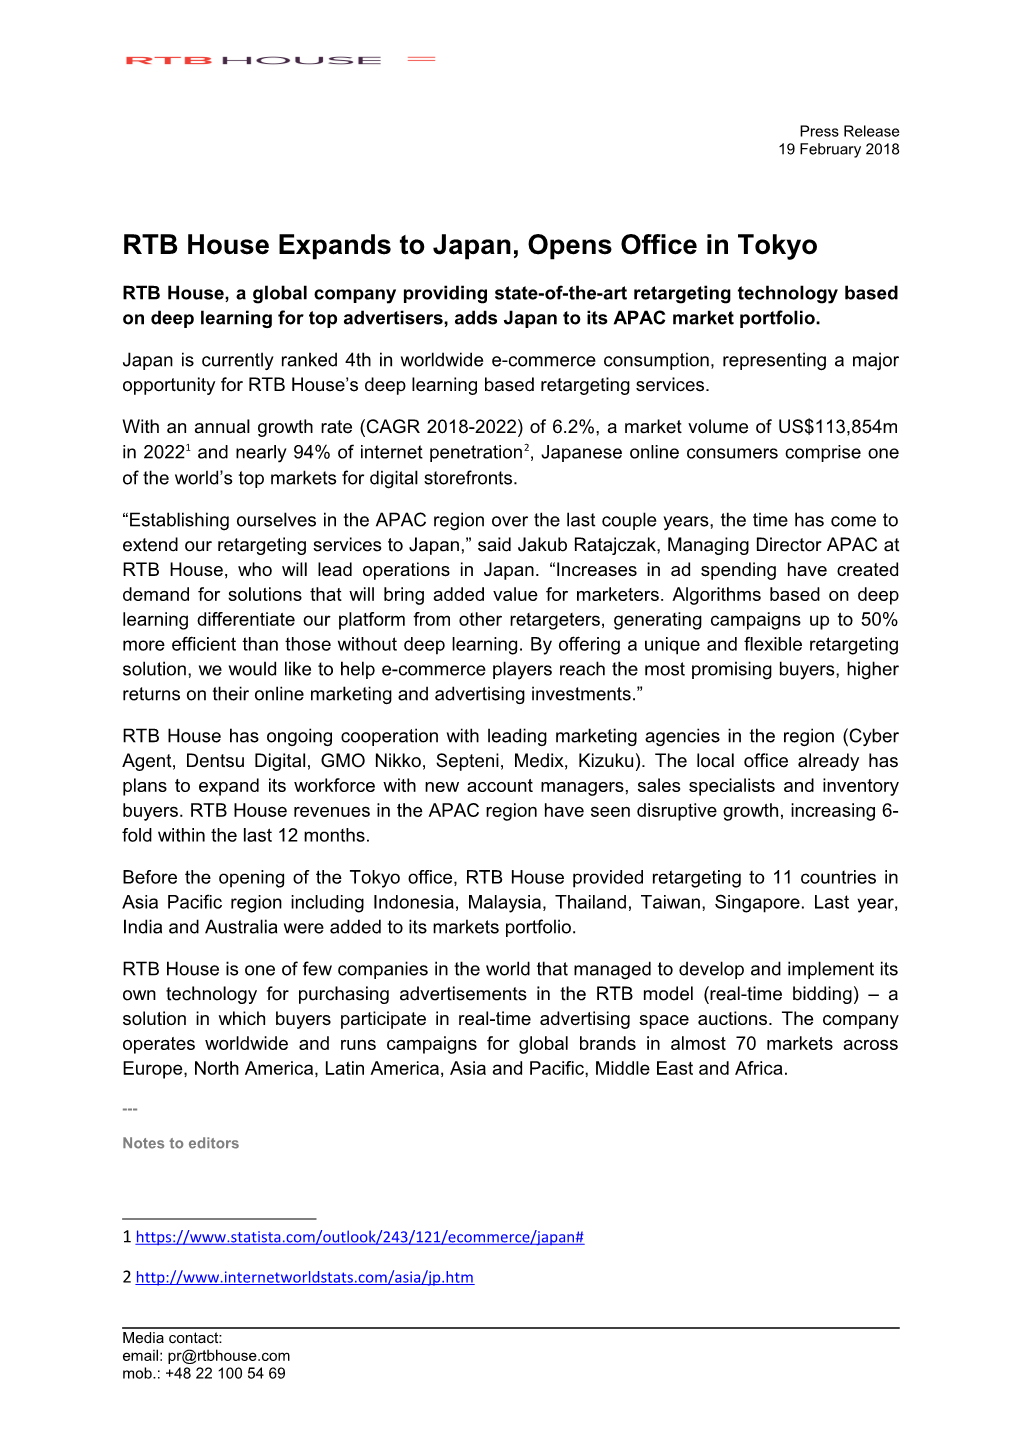 RTB House Expands to Japan, Opens Office in Tokyo